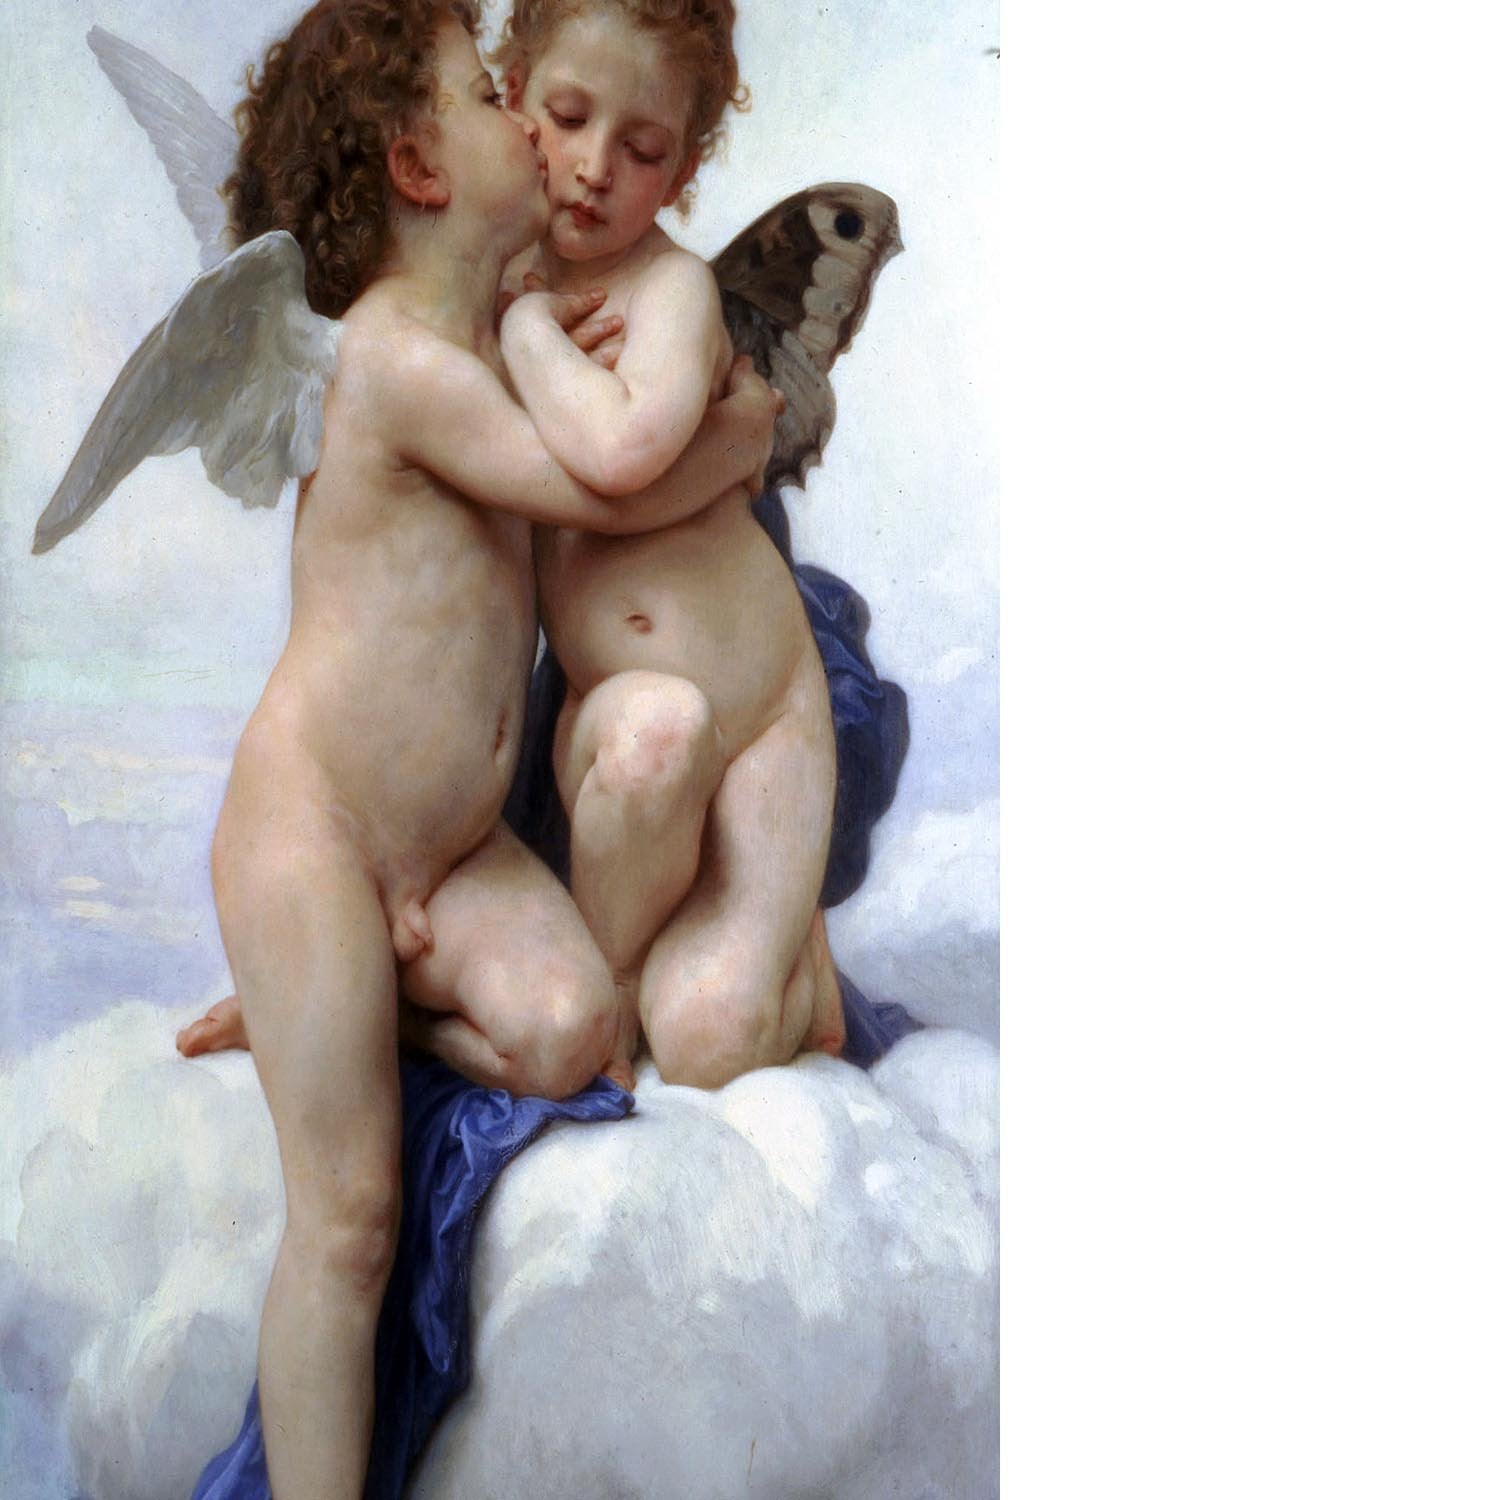 First Kiss By Bouguereau Floating Framed Canvas